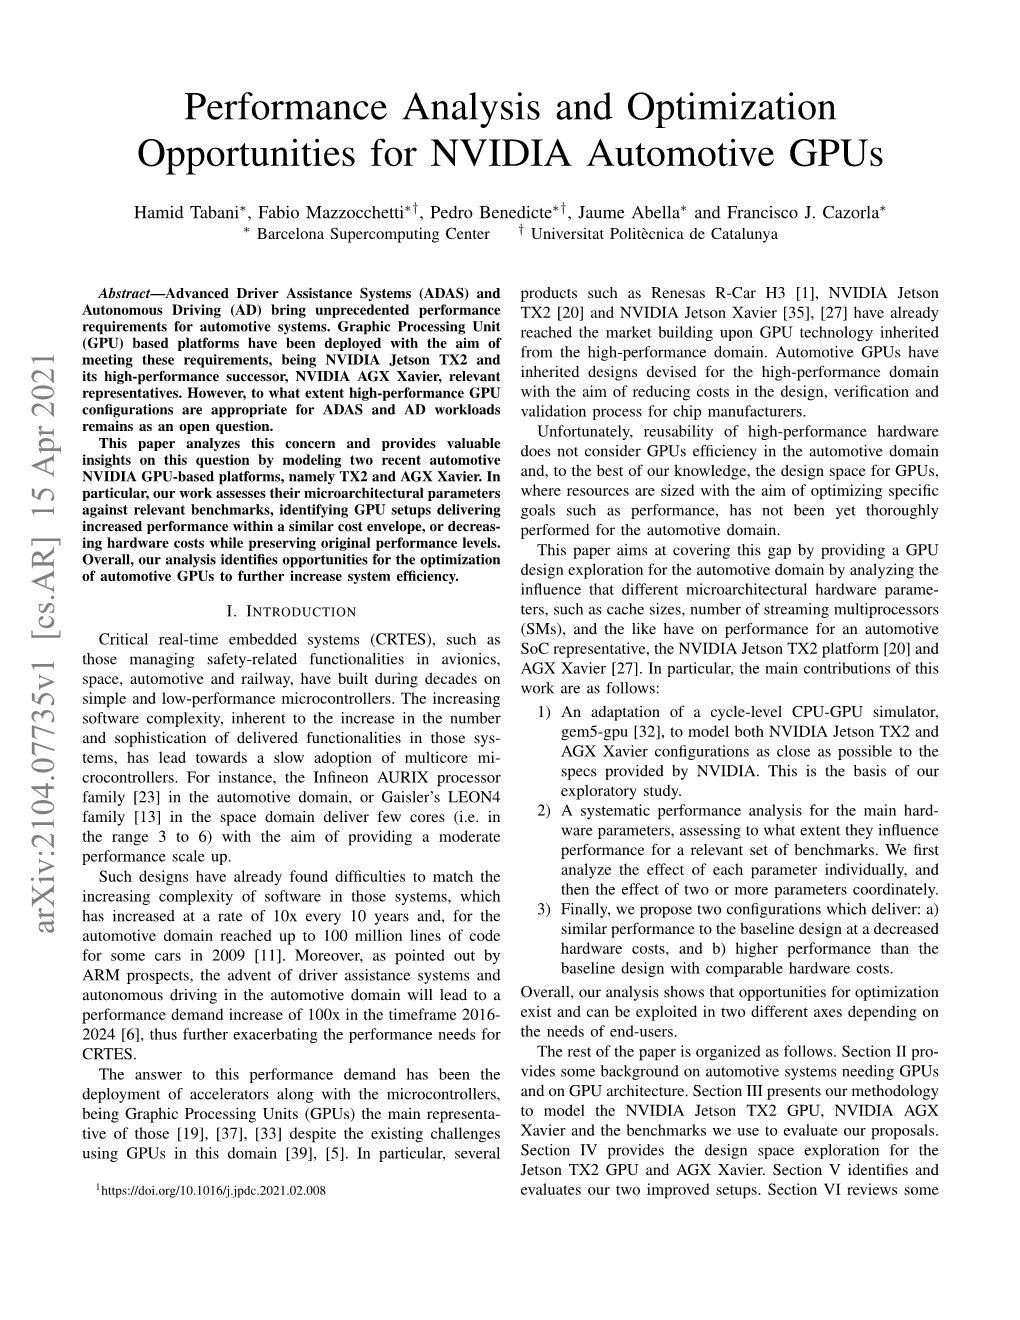 Performance Analysis and Optimization Opportunities for NVIDIA Automotive Gpus